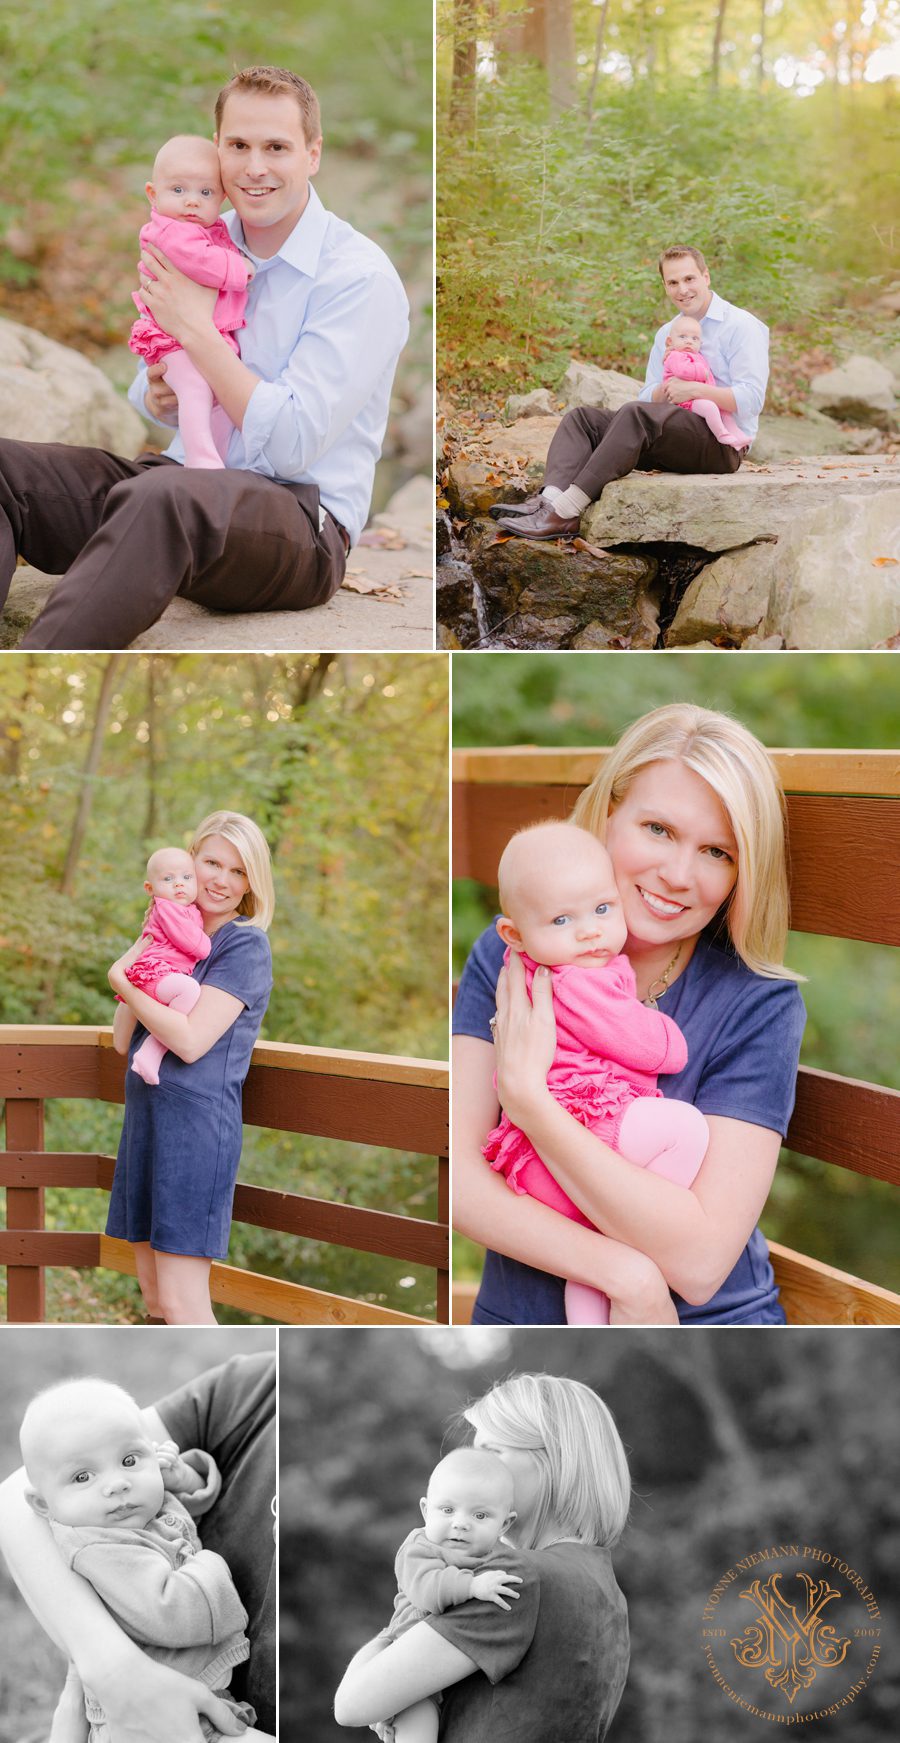 Newborn fall family portraits in Athens, GA outside.